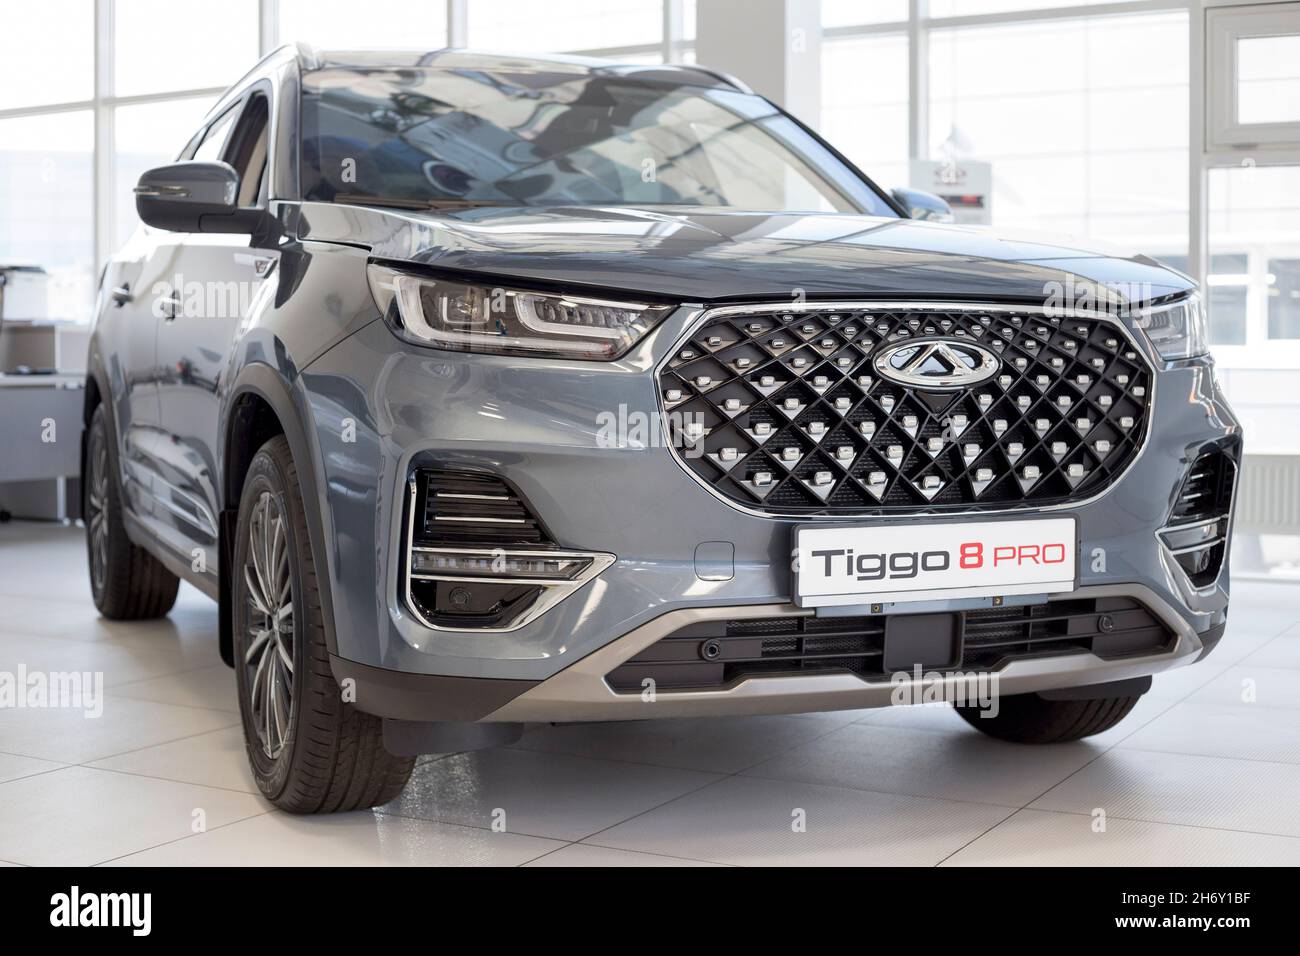 Russia, Izhevsk - August 19, 2021: Chery showroom. New modern Tiggo 8 Pro  car in dealer showroom. Front and side view. Car manufacturer from China  Stock Photo - Alamy